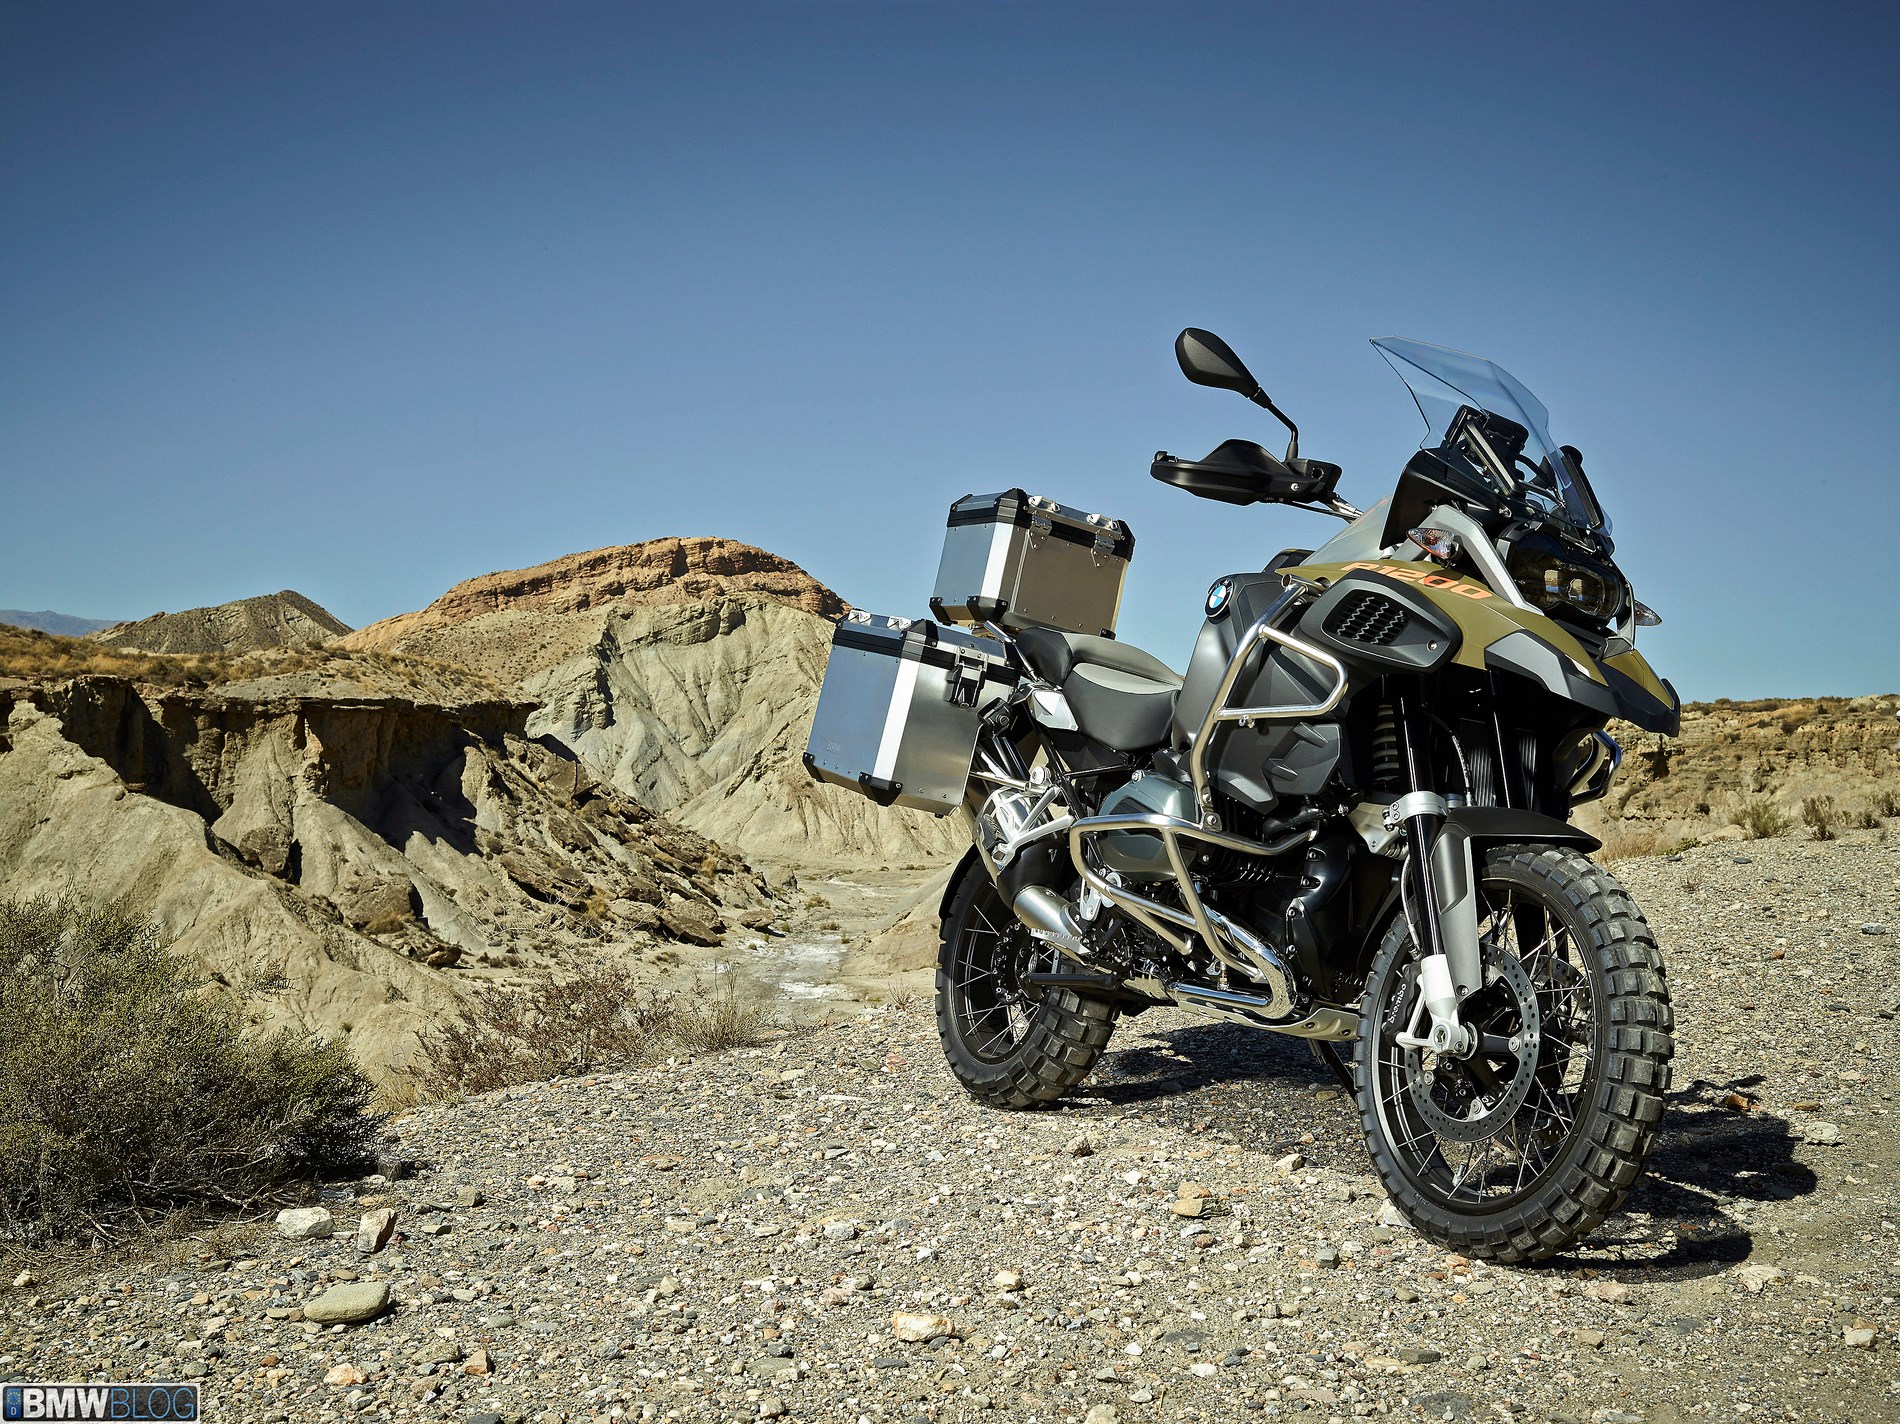 The new BMW R 1200 GS Adventure